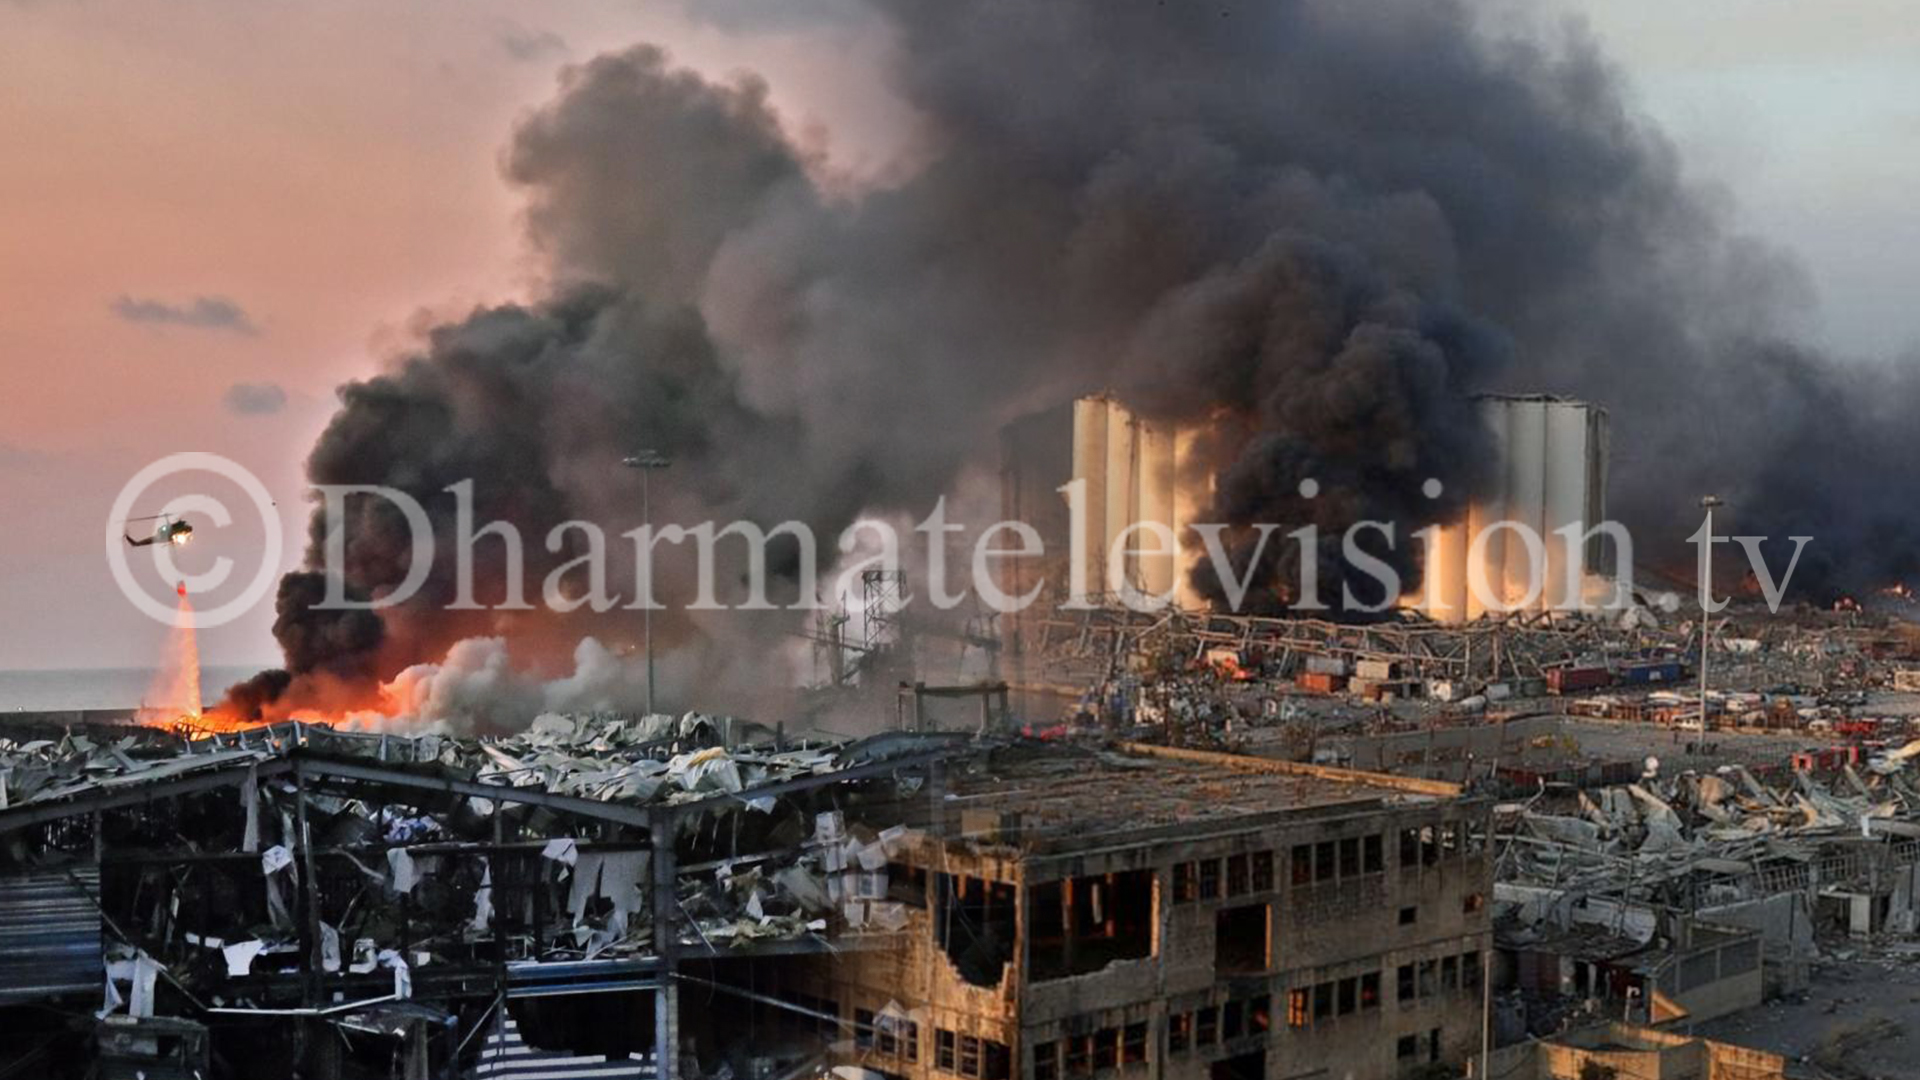 Beirut Explosion: Story of How The Combustible Chemical Got There, Where it Wasn’t Supposed to Be